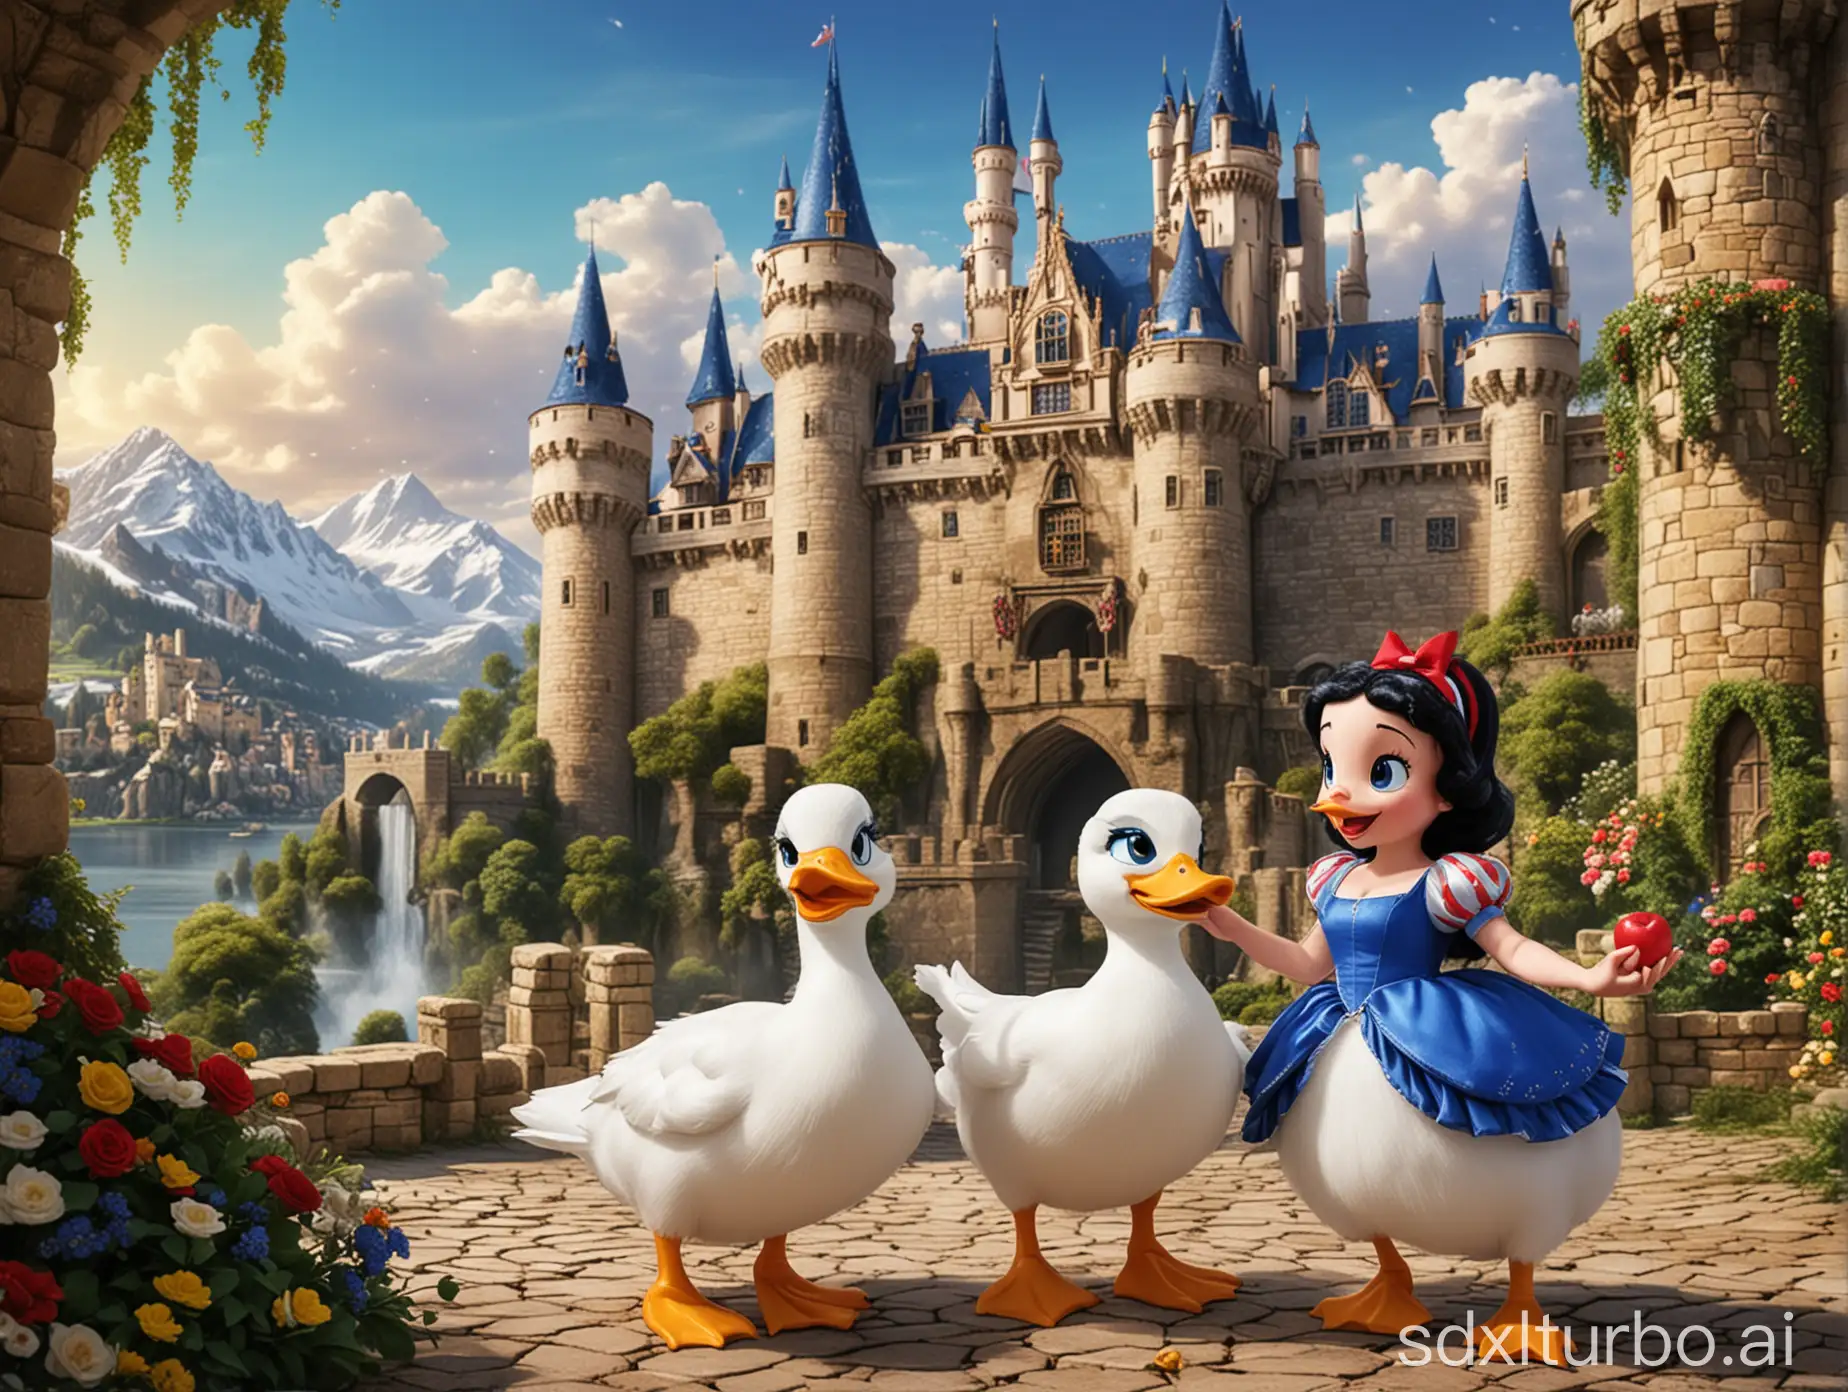 Canreach-Duck-and-Snow-White-in-Castle-Courtyard